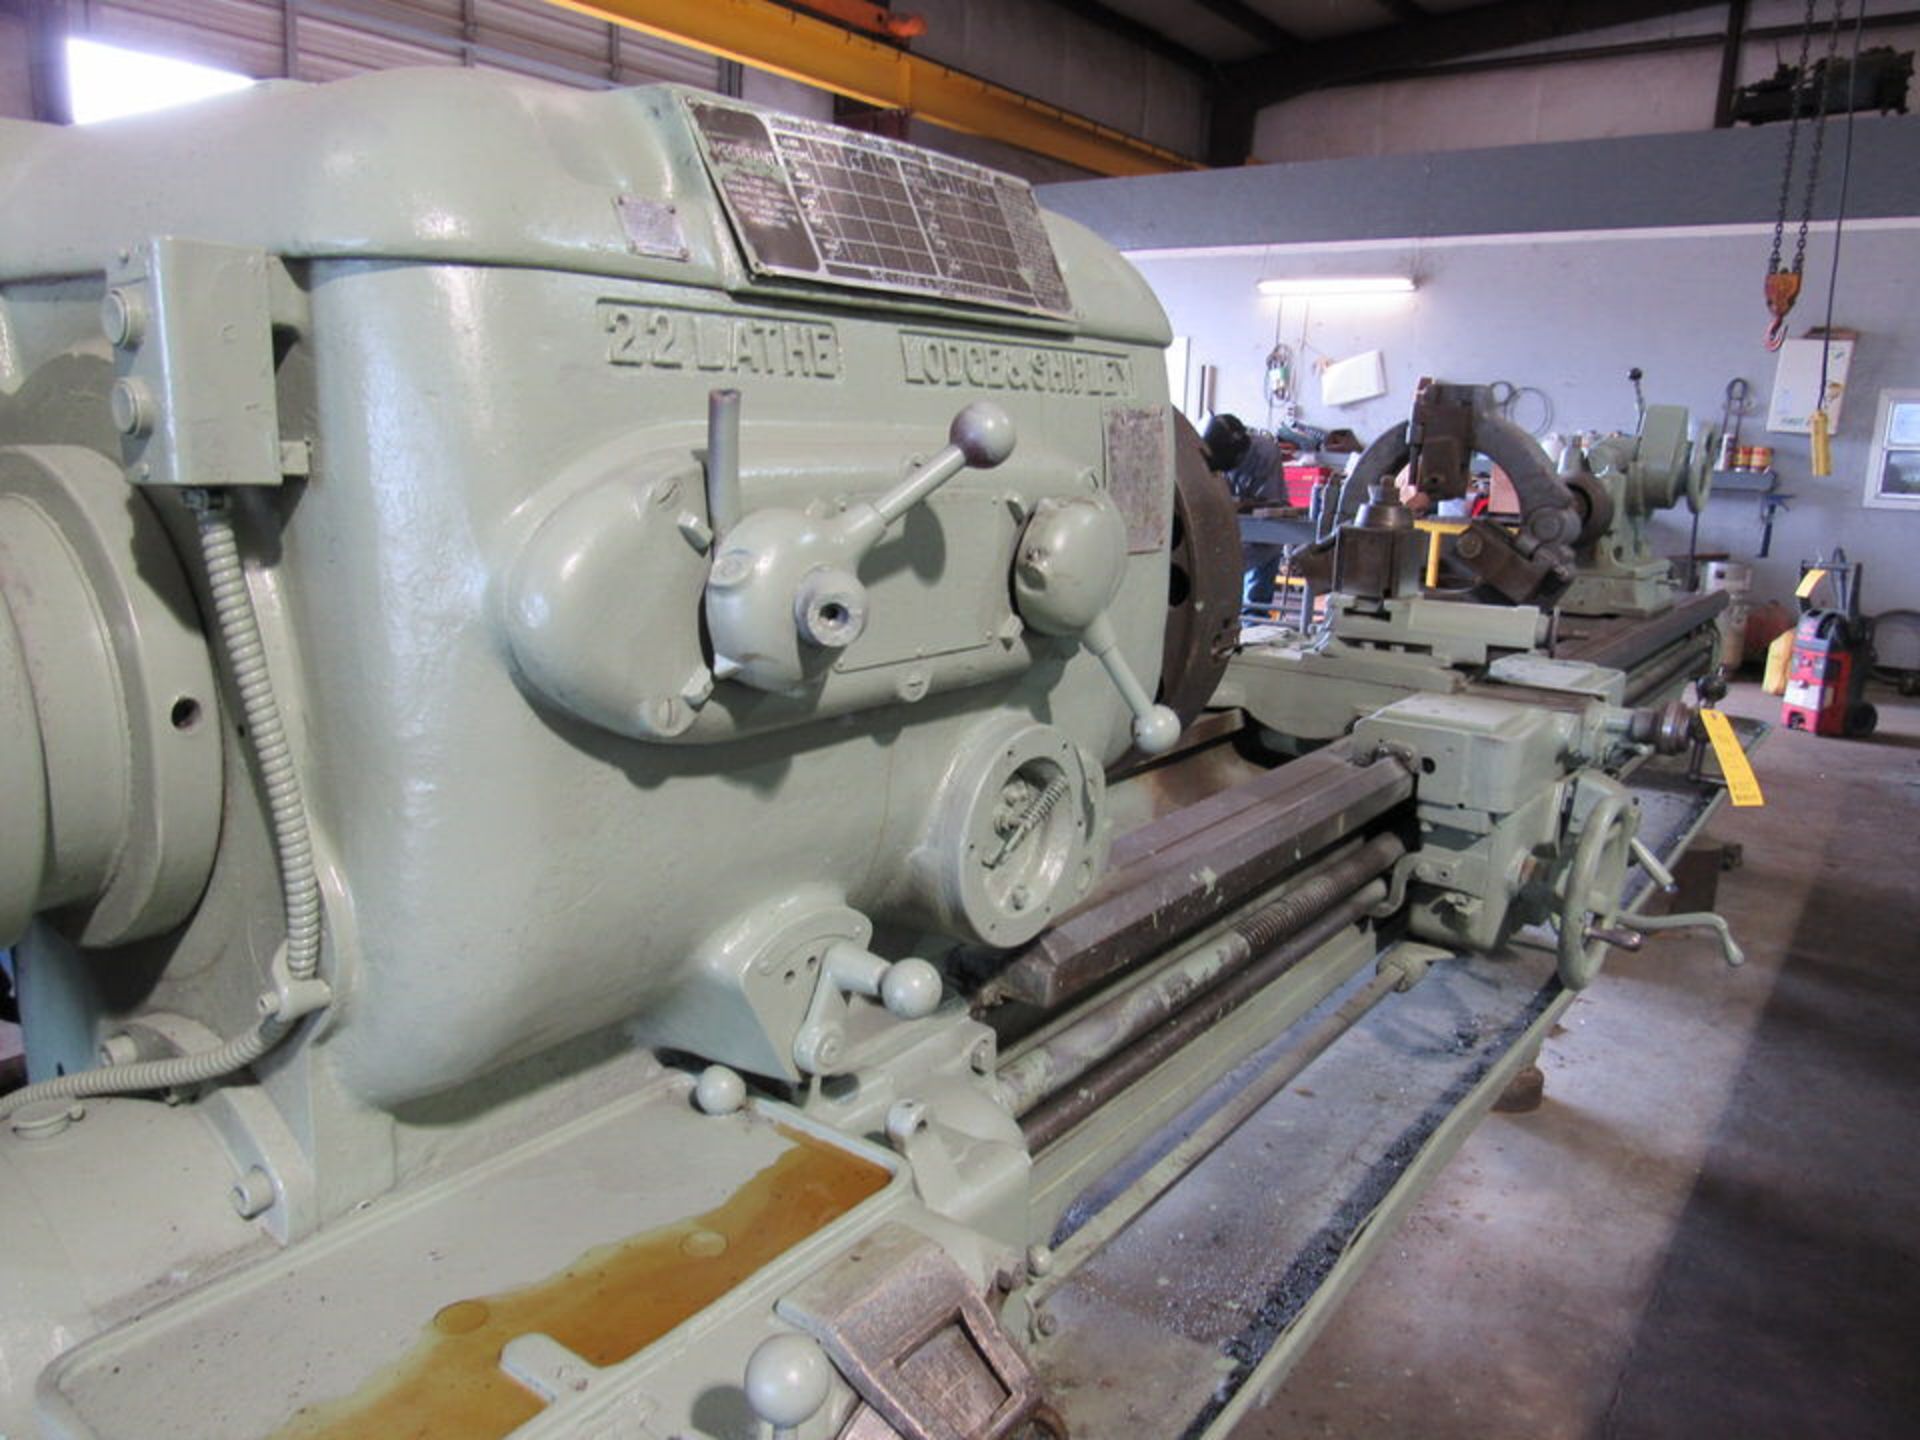 Lodge & Shipley Engine Lathe, 24" swing, 144" bed length, 21" 4-jaw front and rear chucks, 8-9/16"